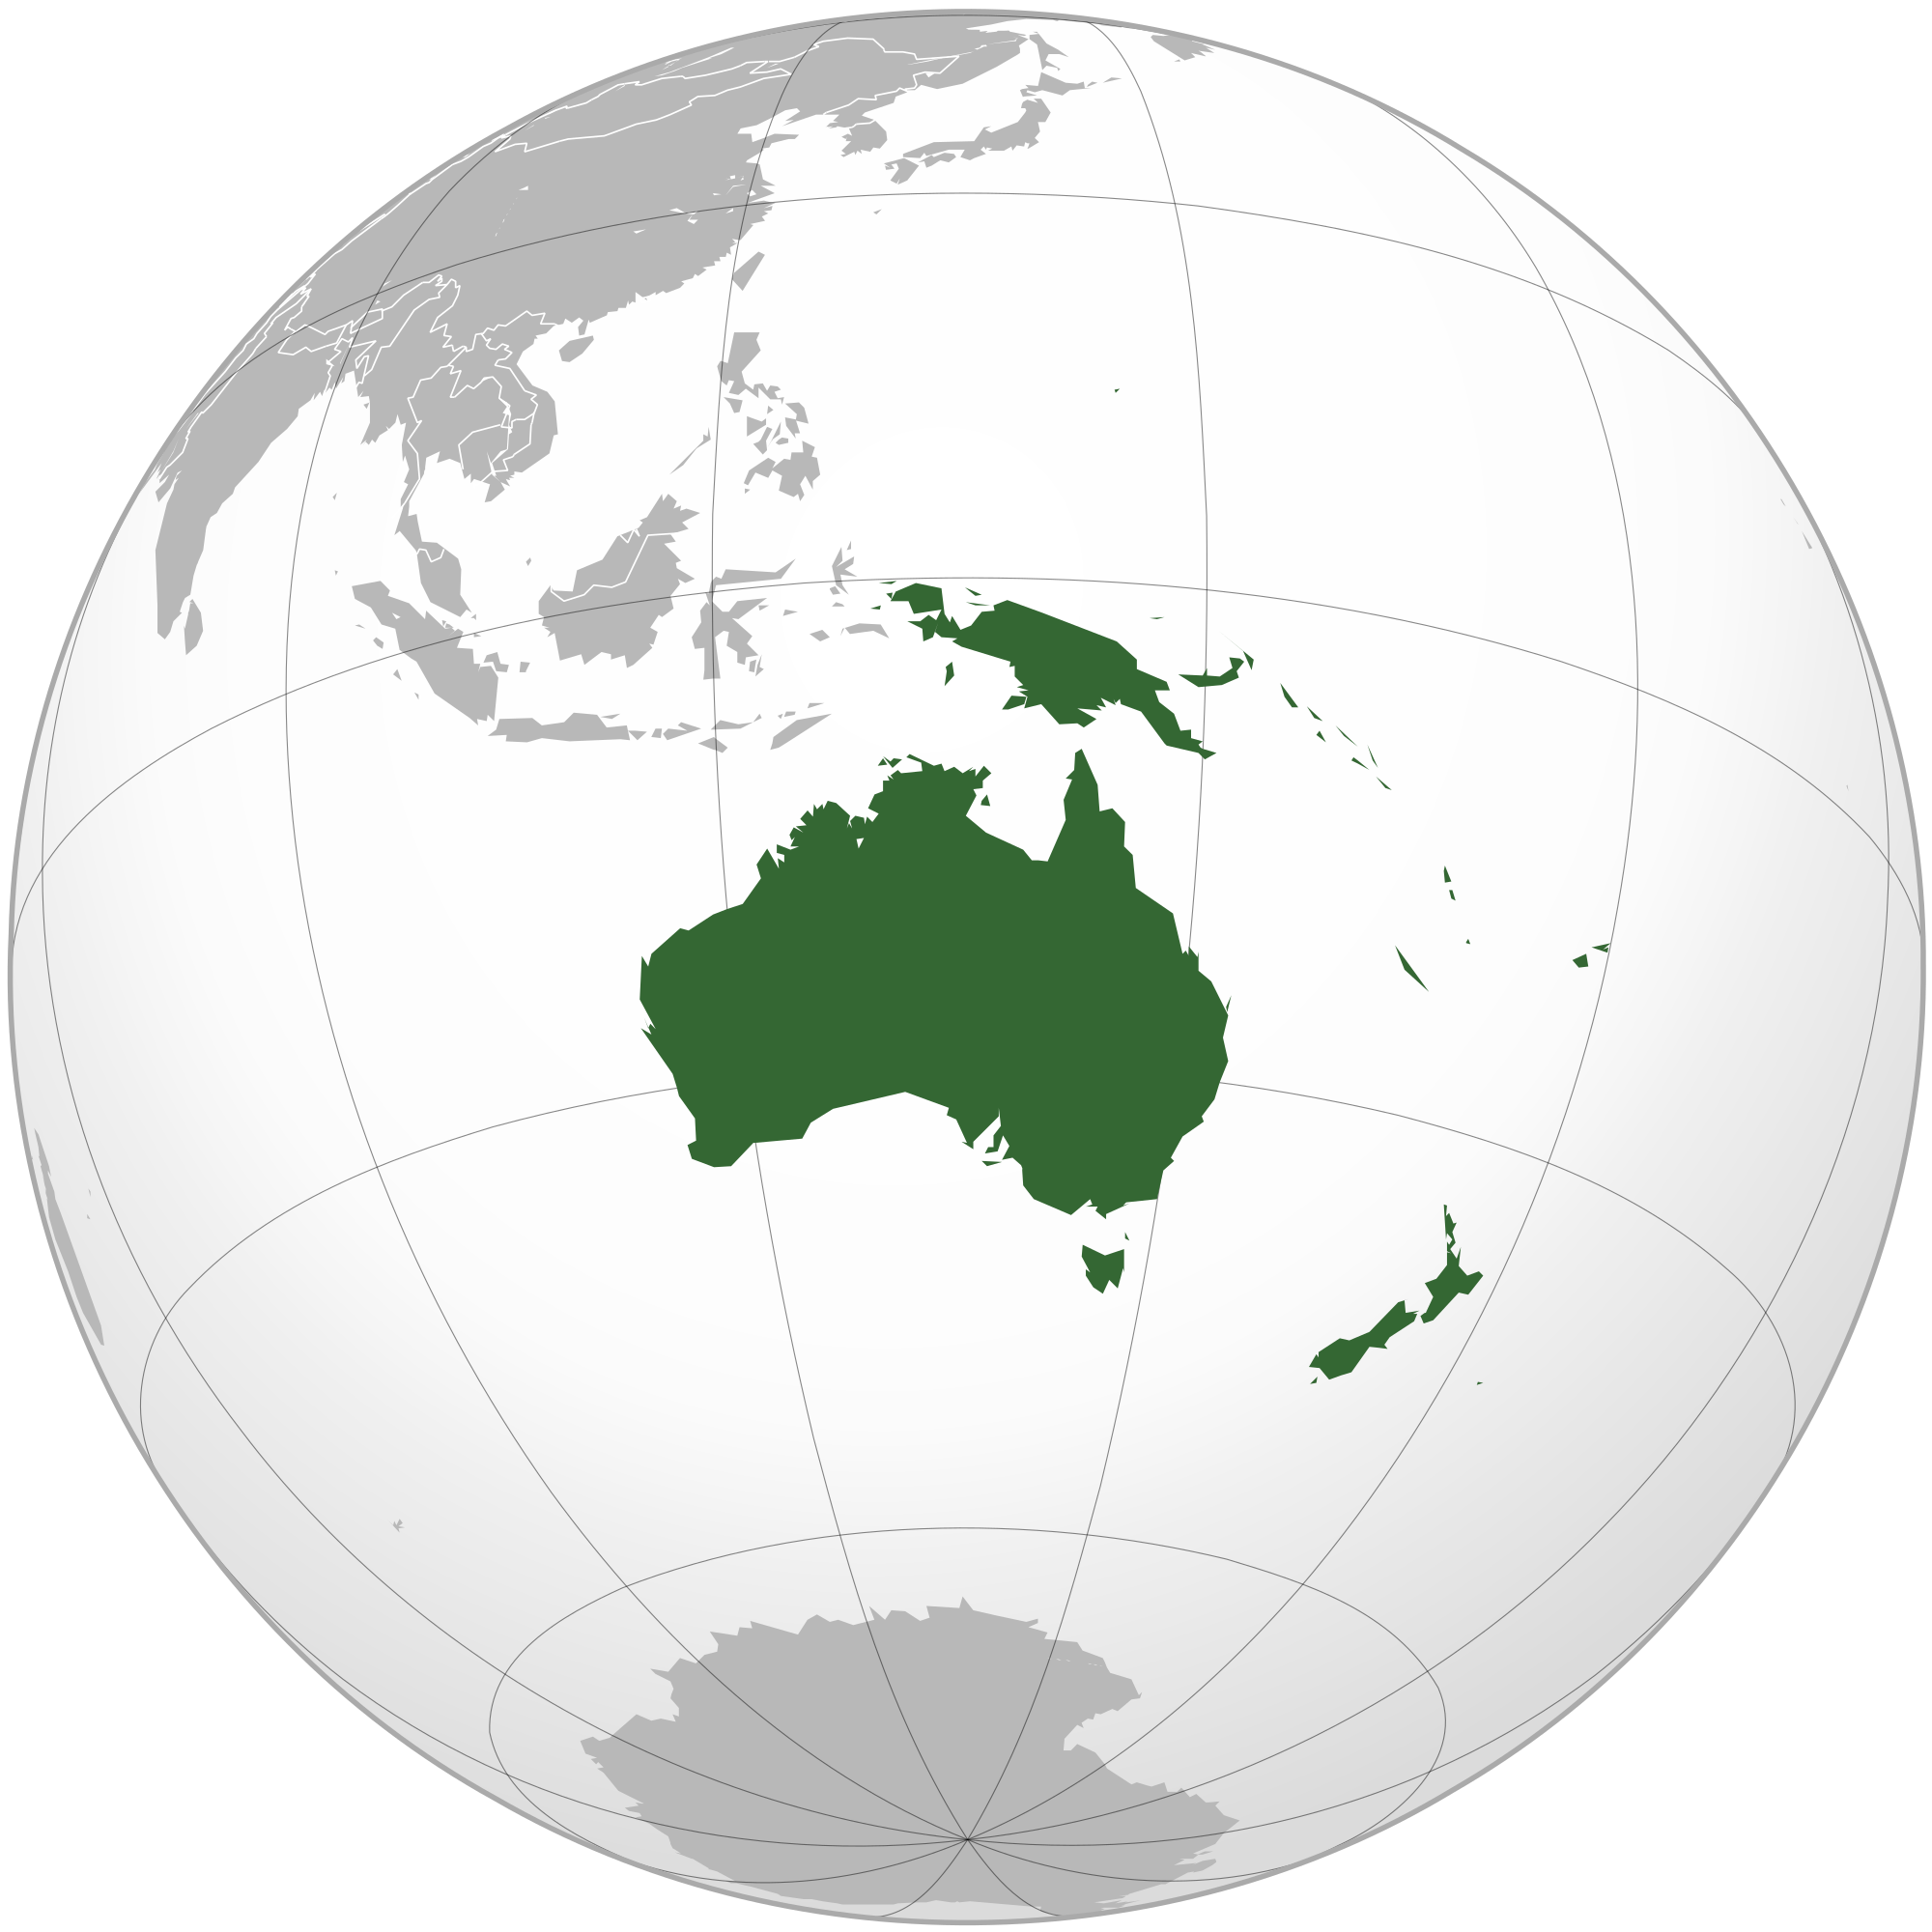 Oceania country visa requirements